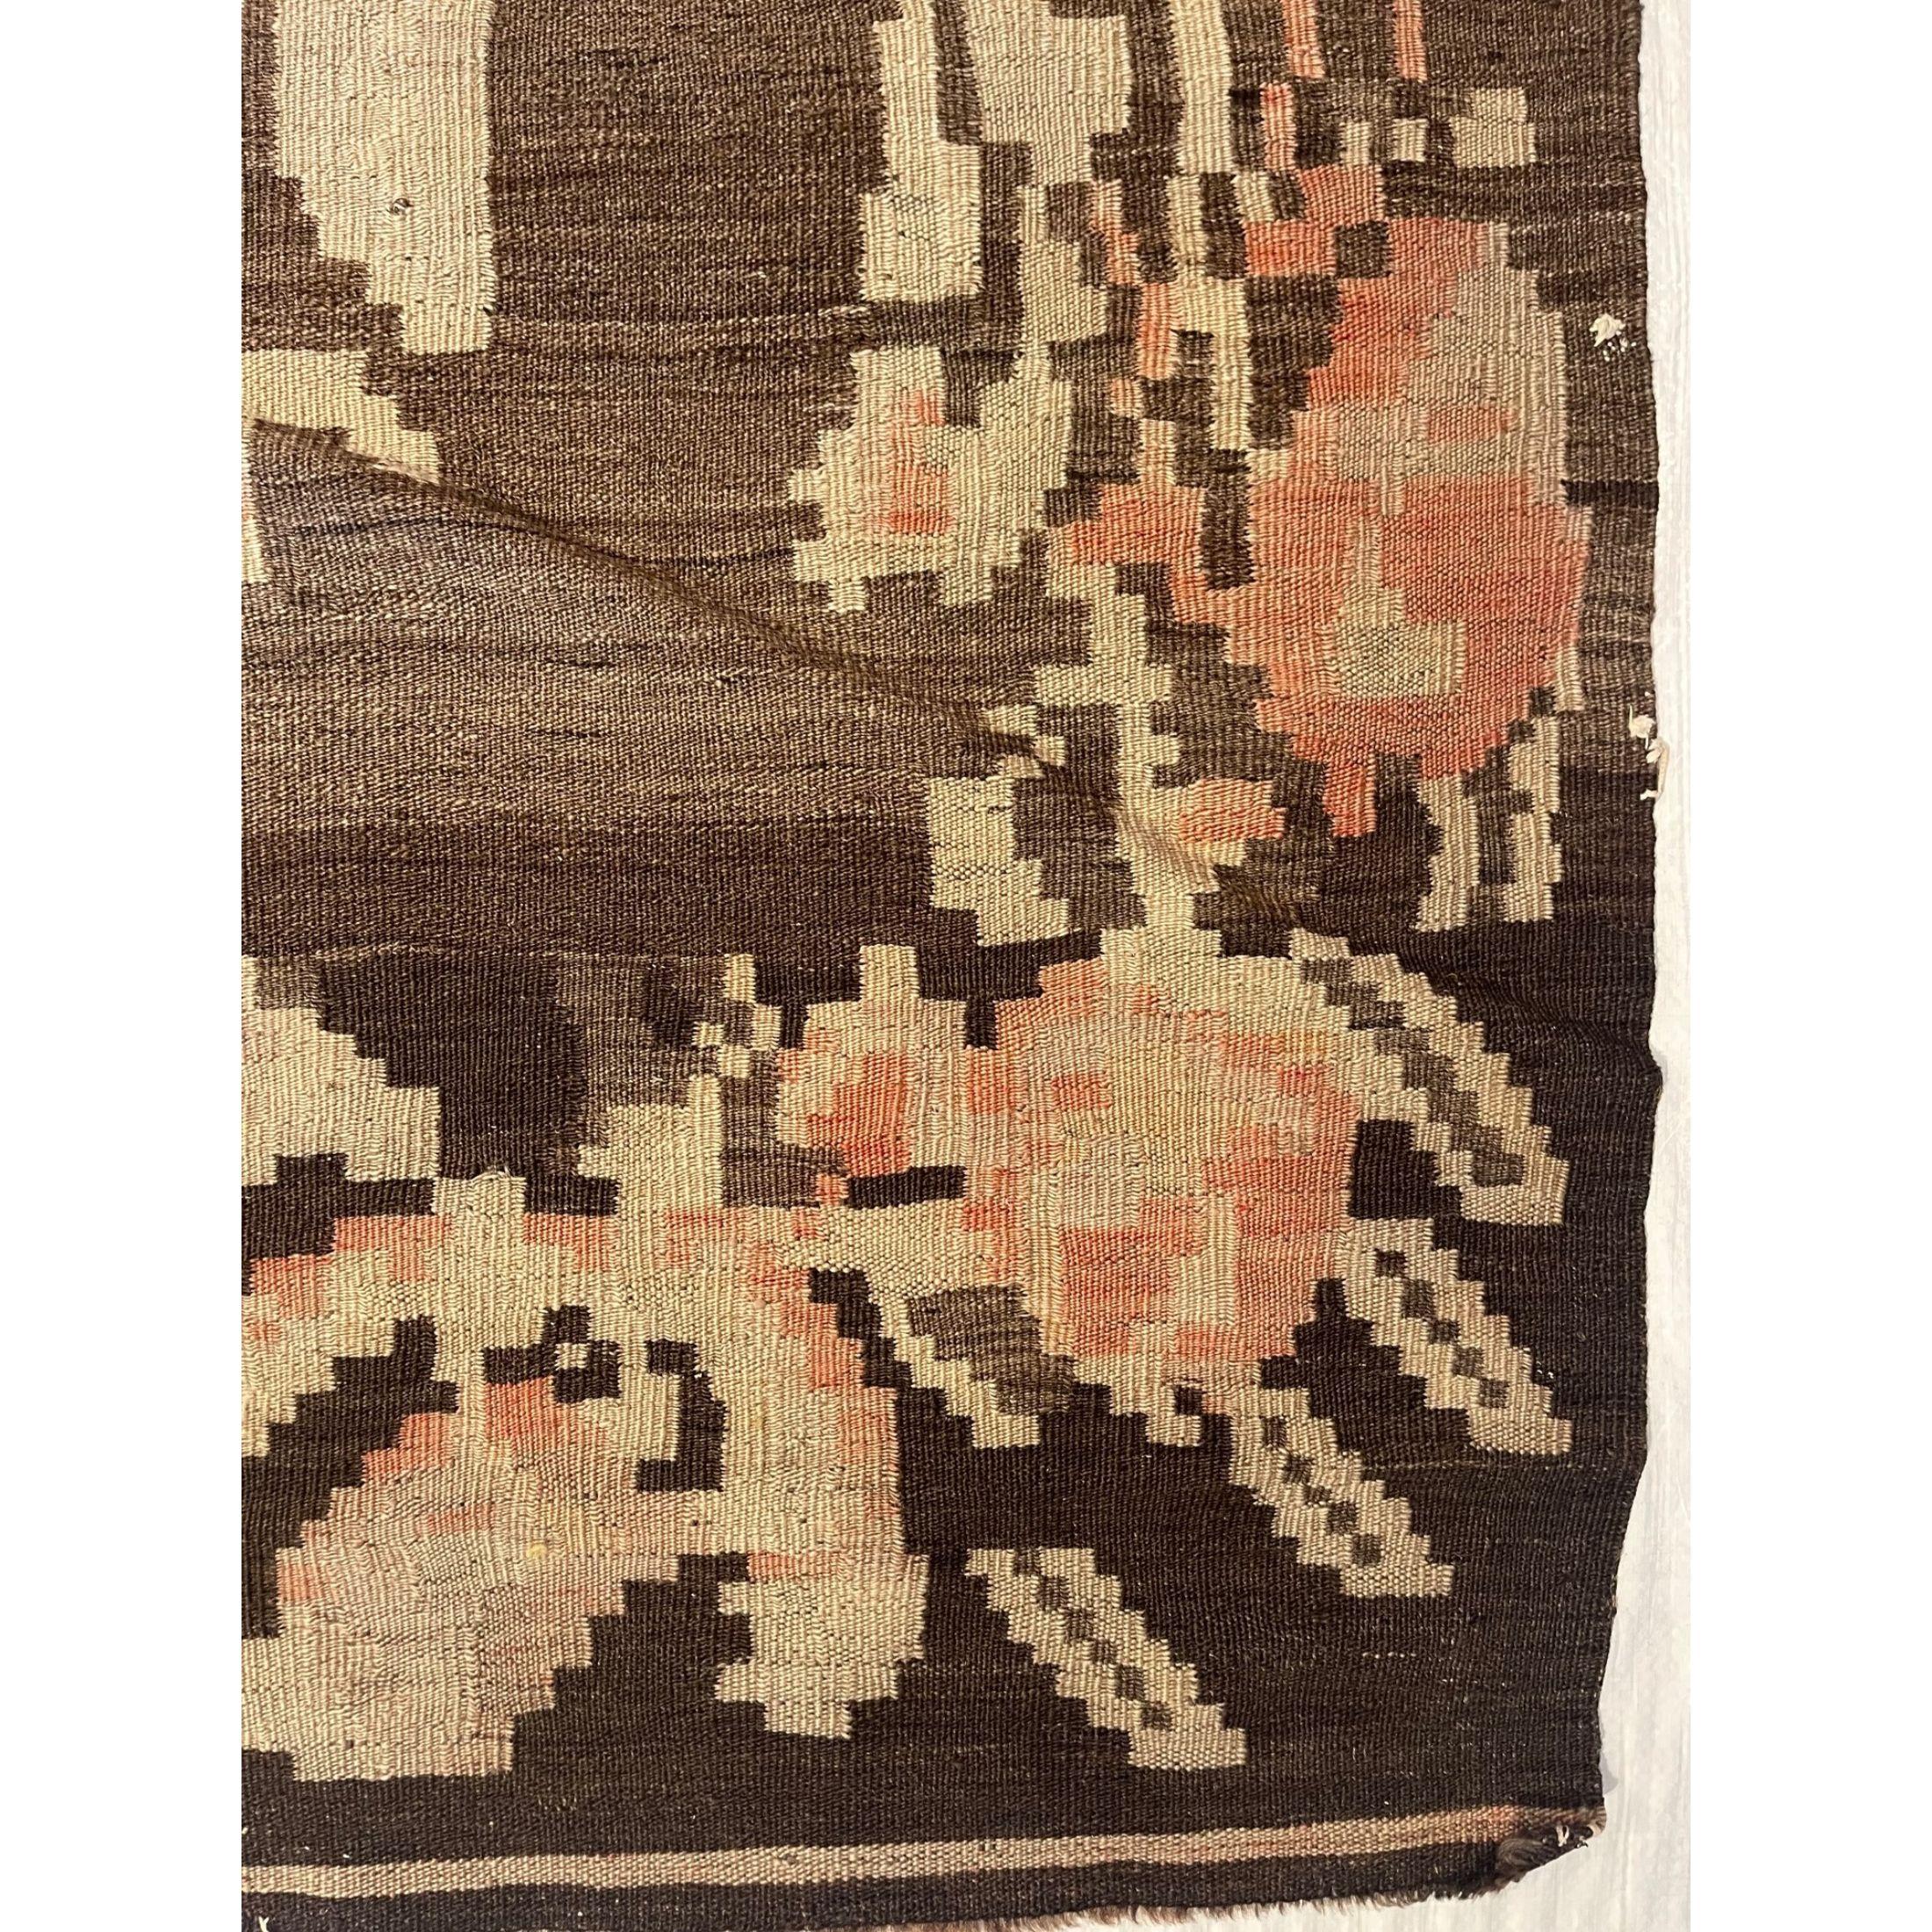 1920 Antique Flat Weave Kilim Rug In Good Condition For Sale In Los Angeles, US